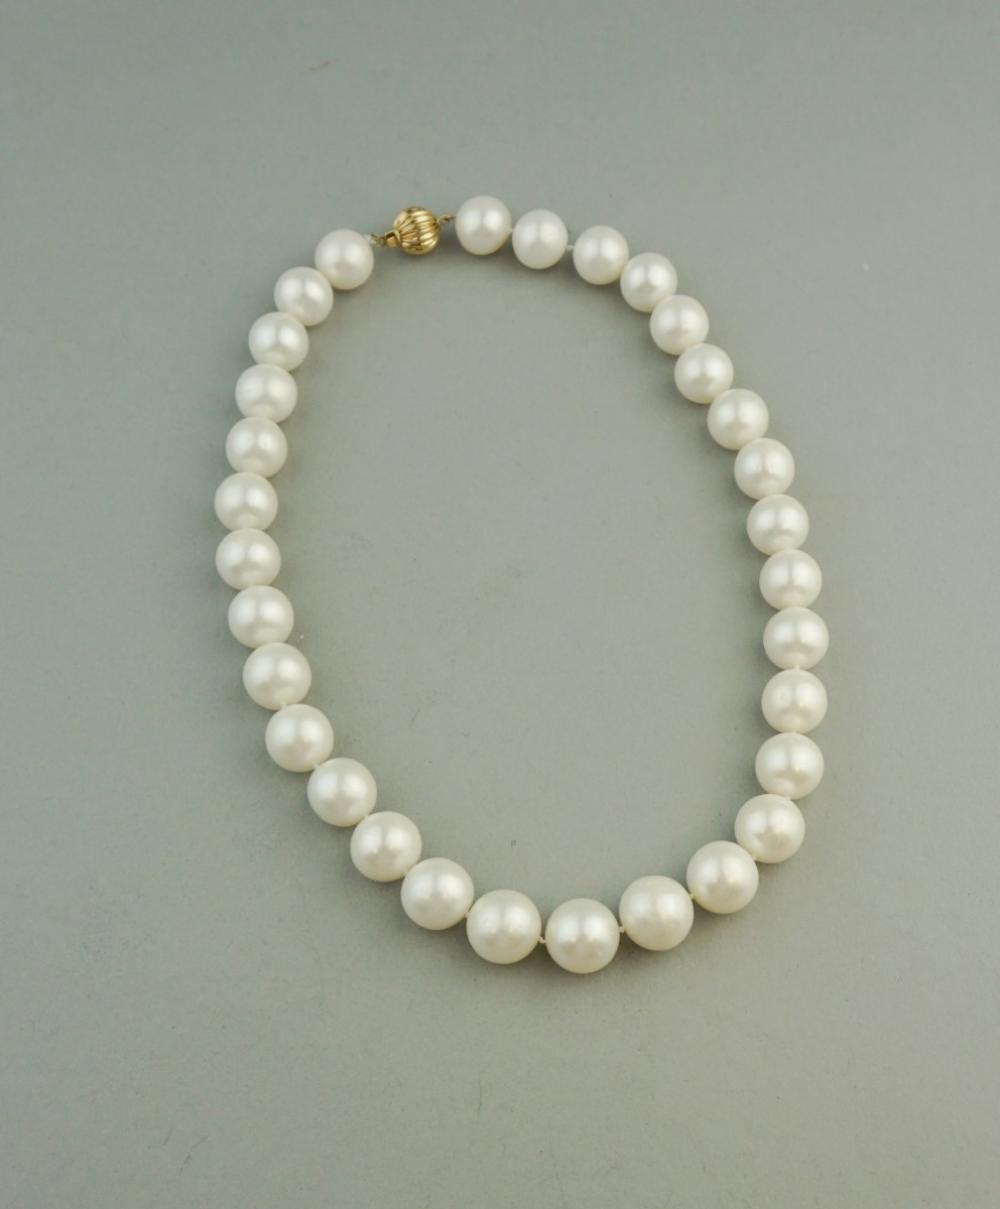 12 14MM SOUTH SEAS PEARL NECKLACE12 14MM 33a4e9